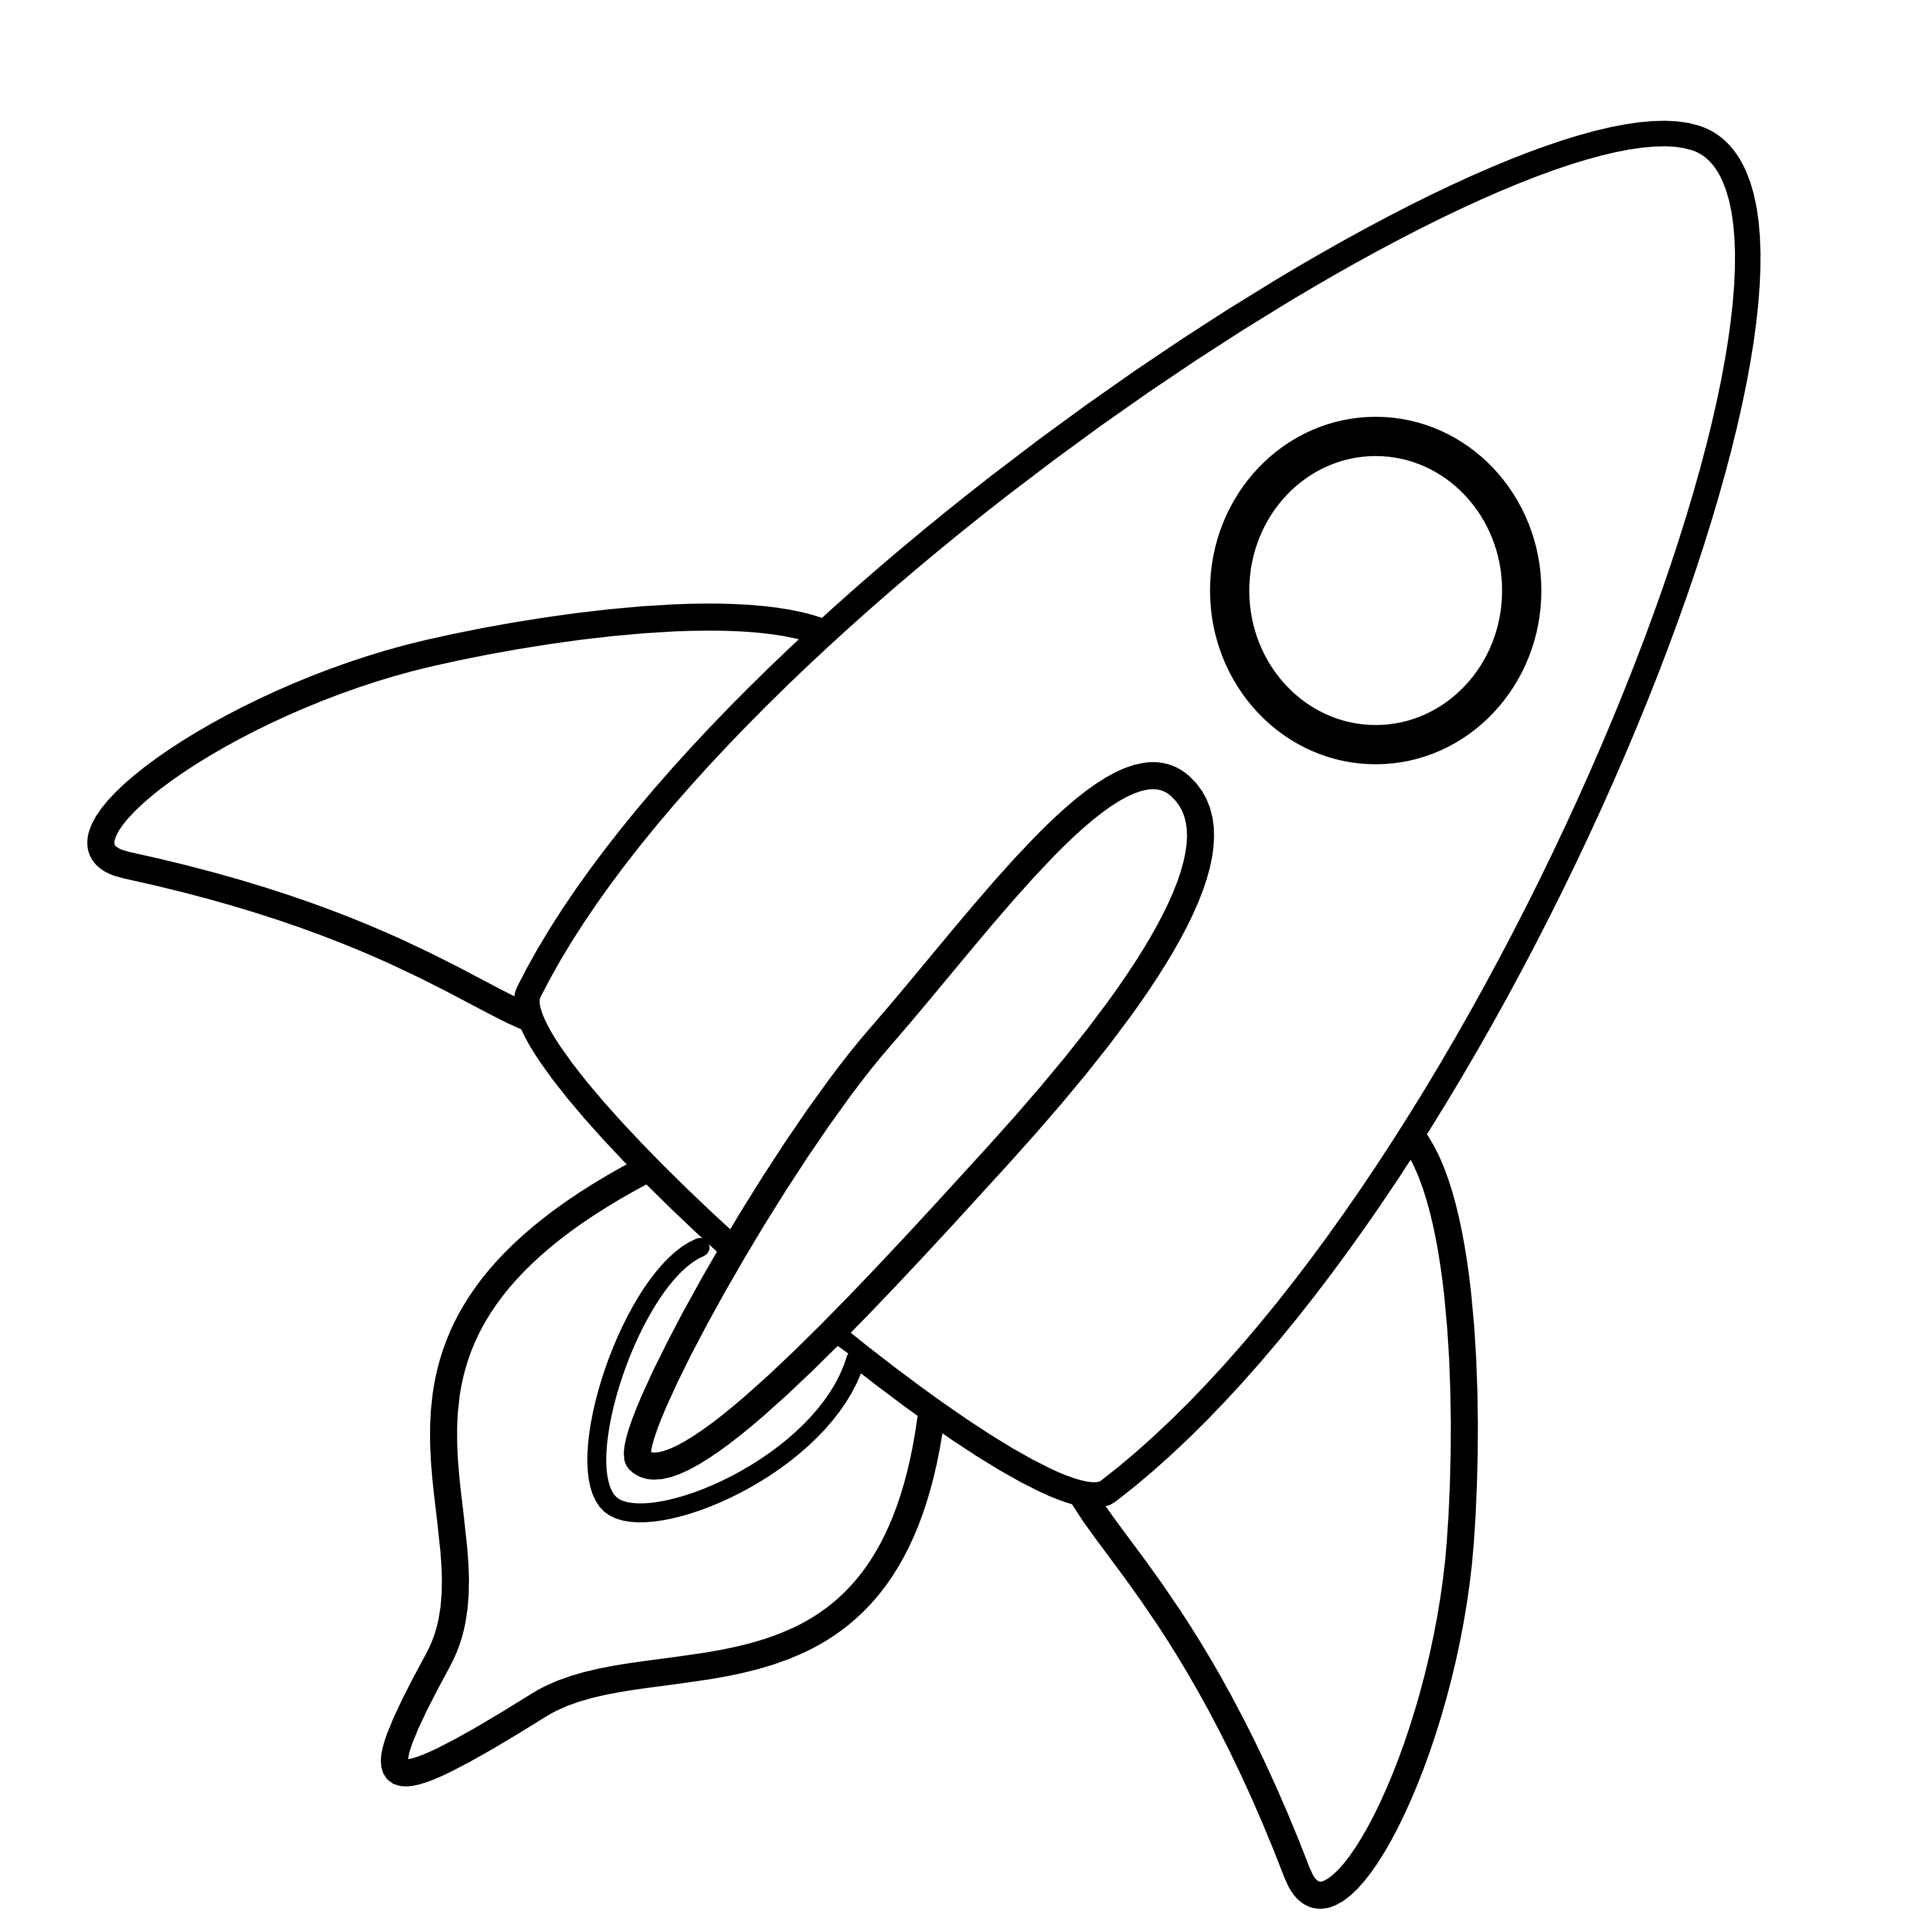 Space rocket clip art black and white pics about space